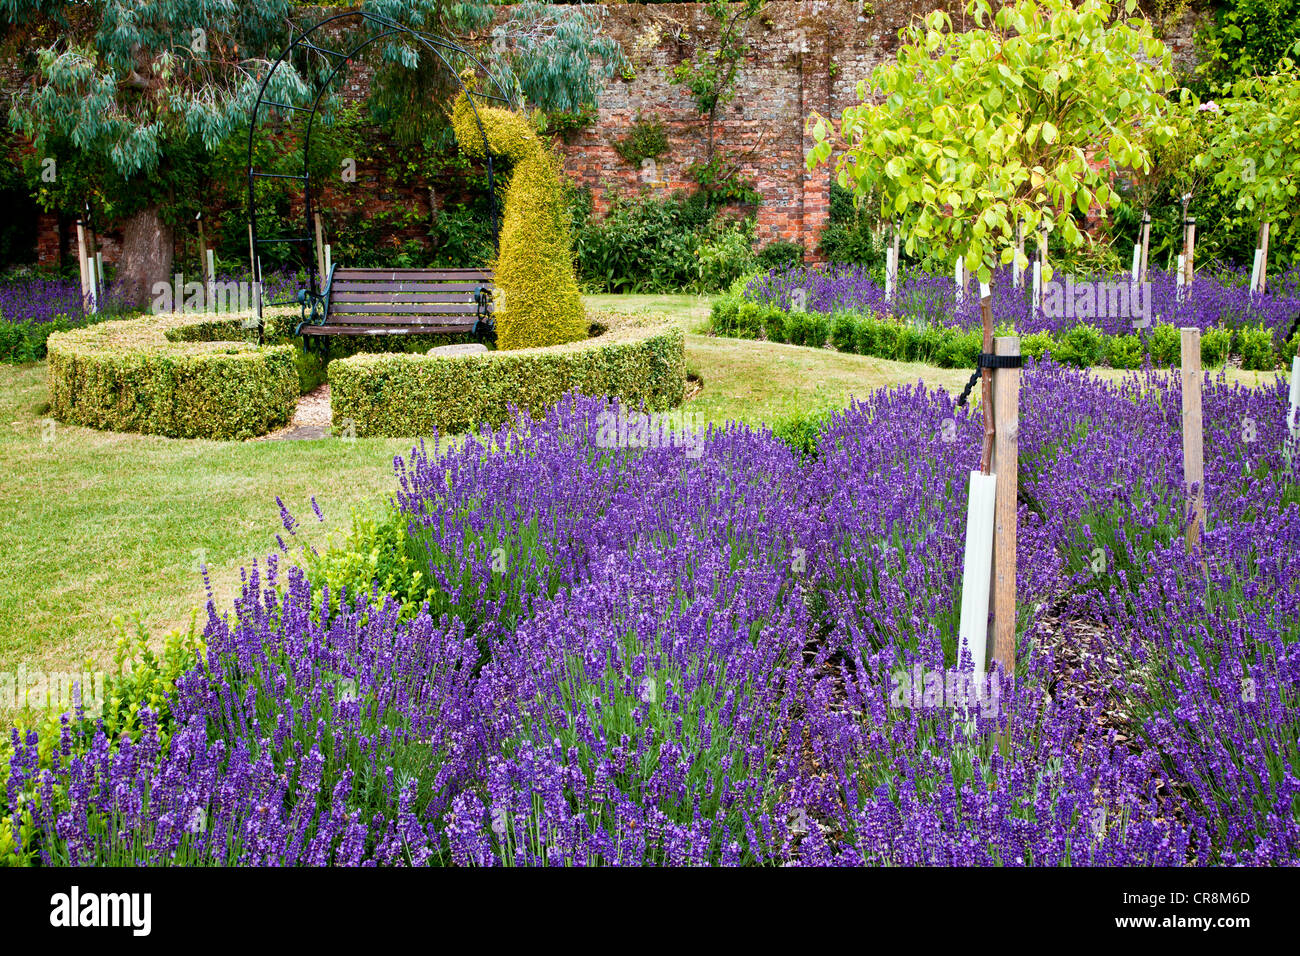 View across the former kitchen garden of the English country garden of Littlecote Manor in Berkshire, England, UK Stock Photo